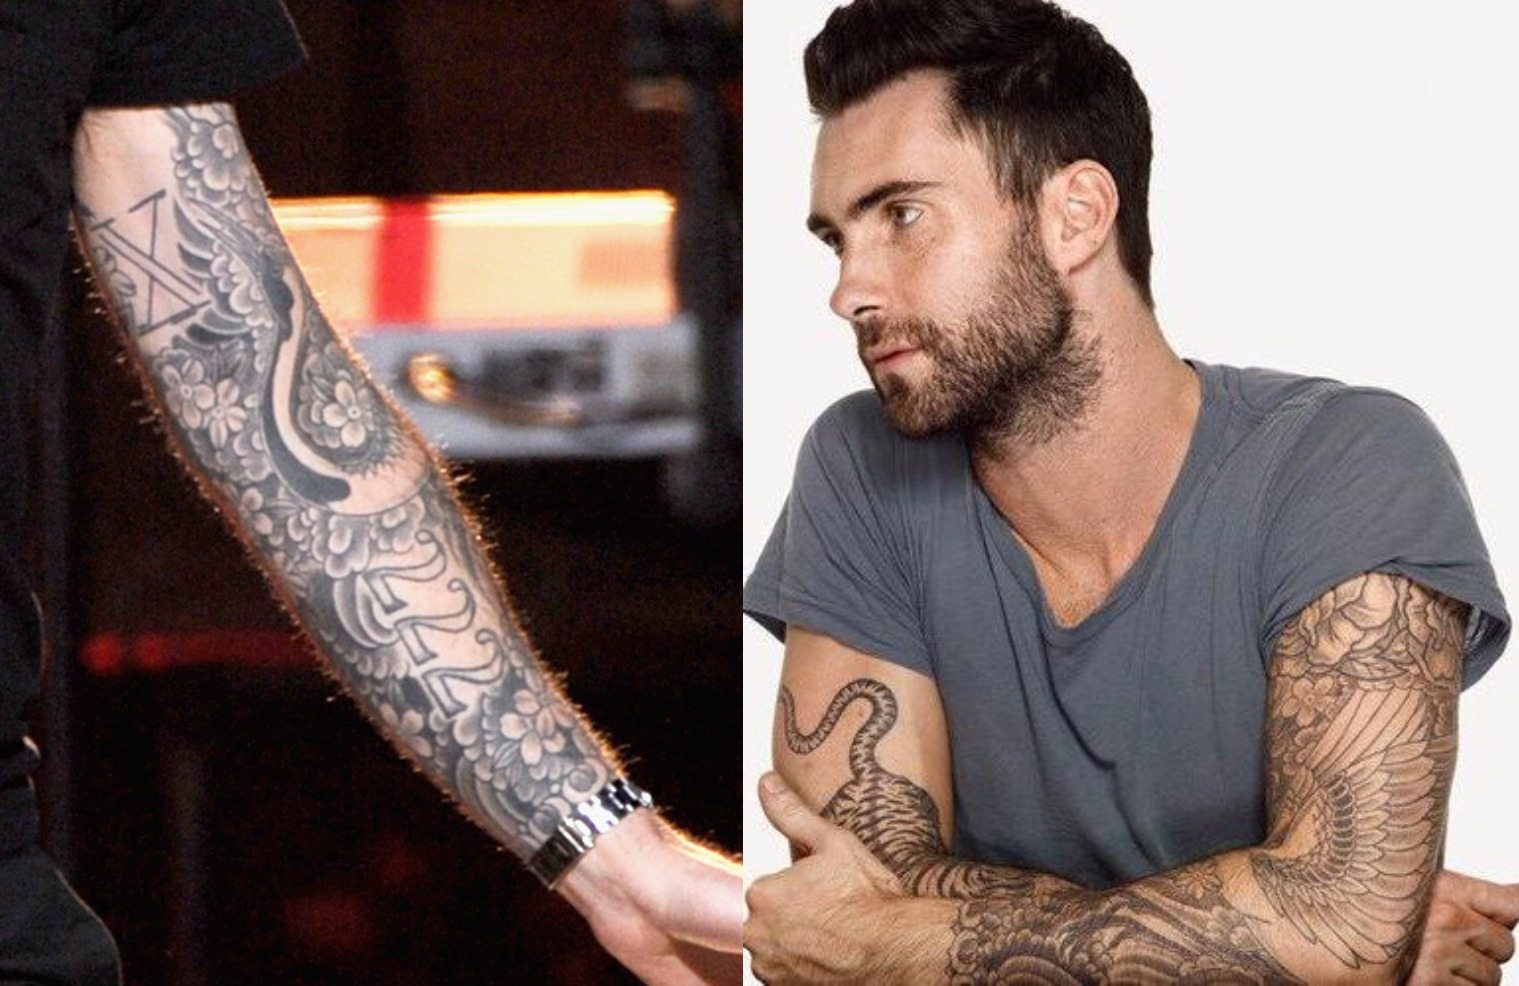 A Complete List of Adam Levine's Tattoos and Their Meanings